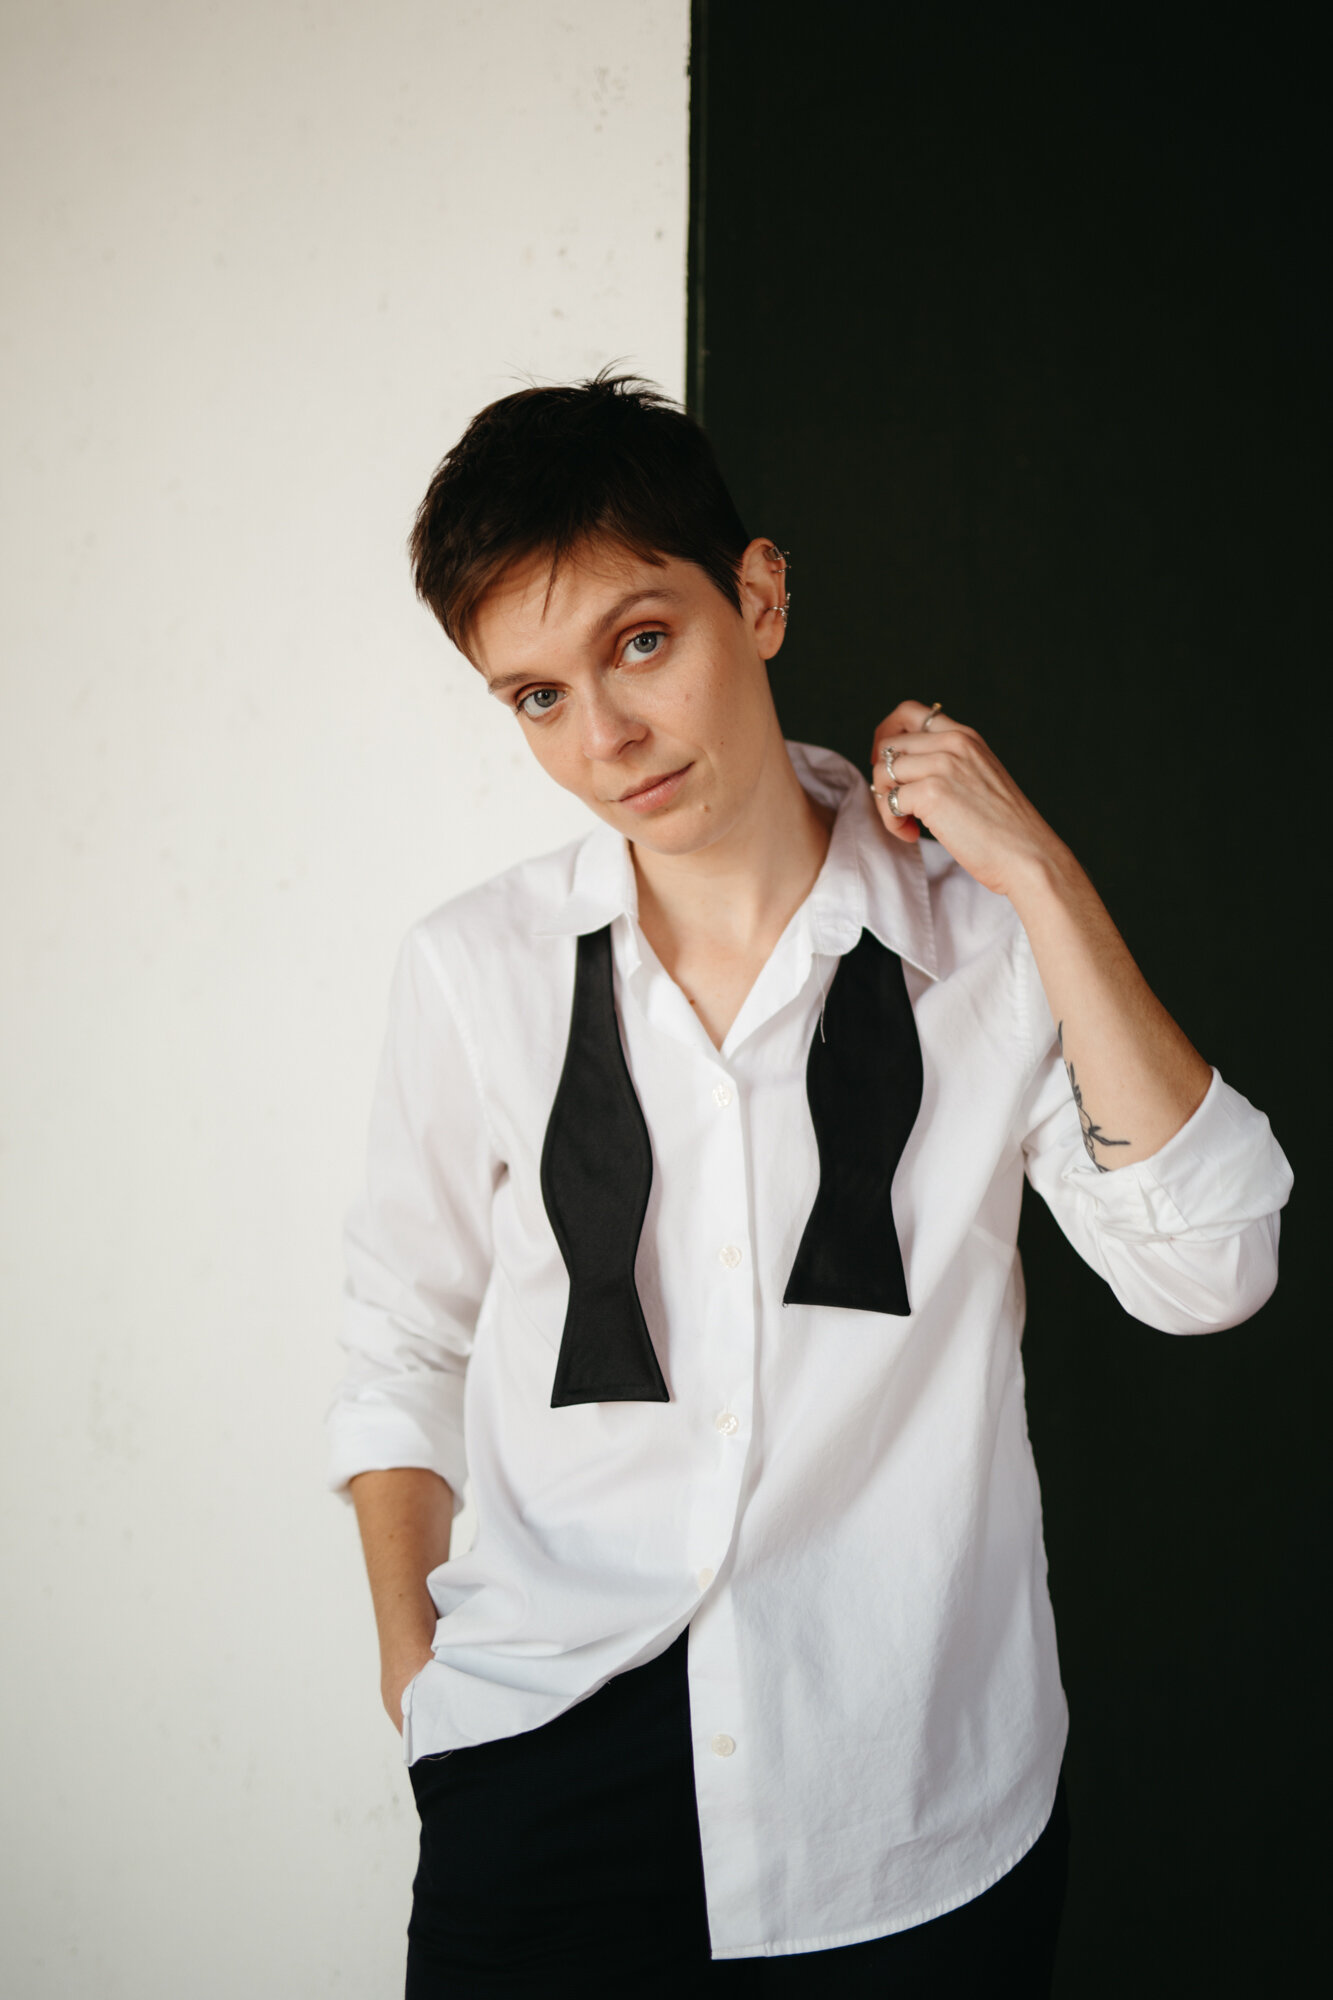 Genderqueer boudoir photo of person wearing a white dress shirt with open bowtie looking at camera